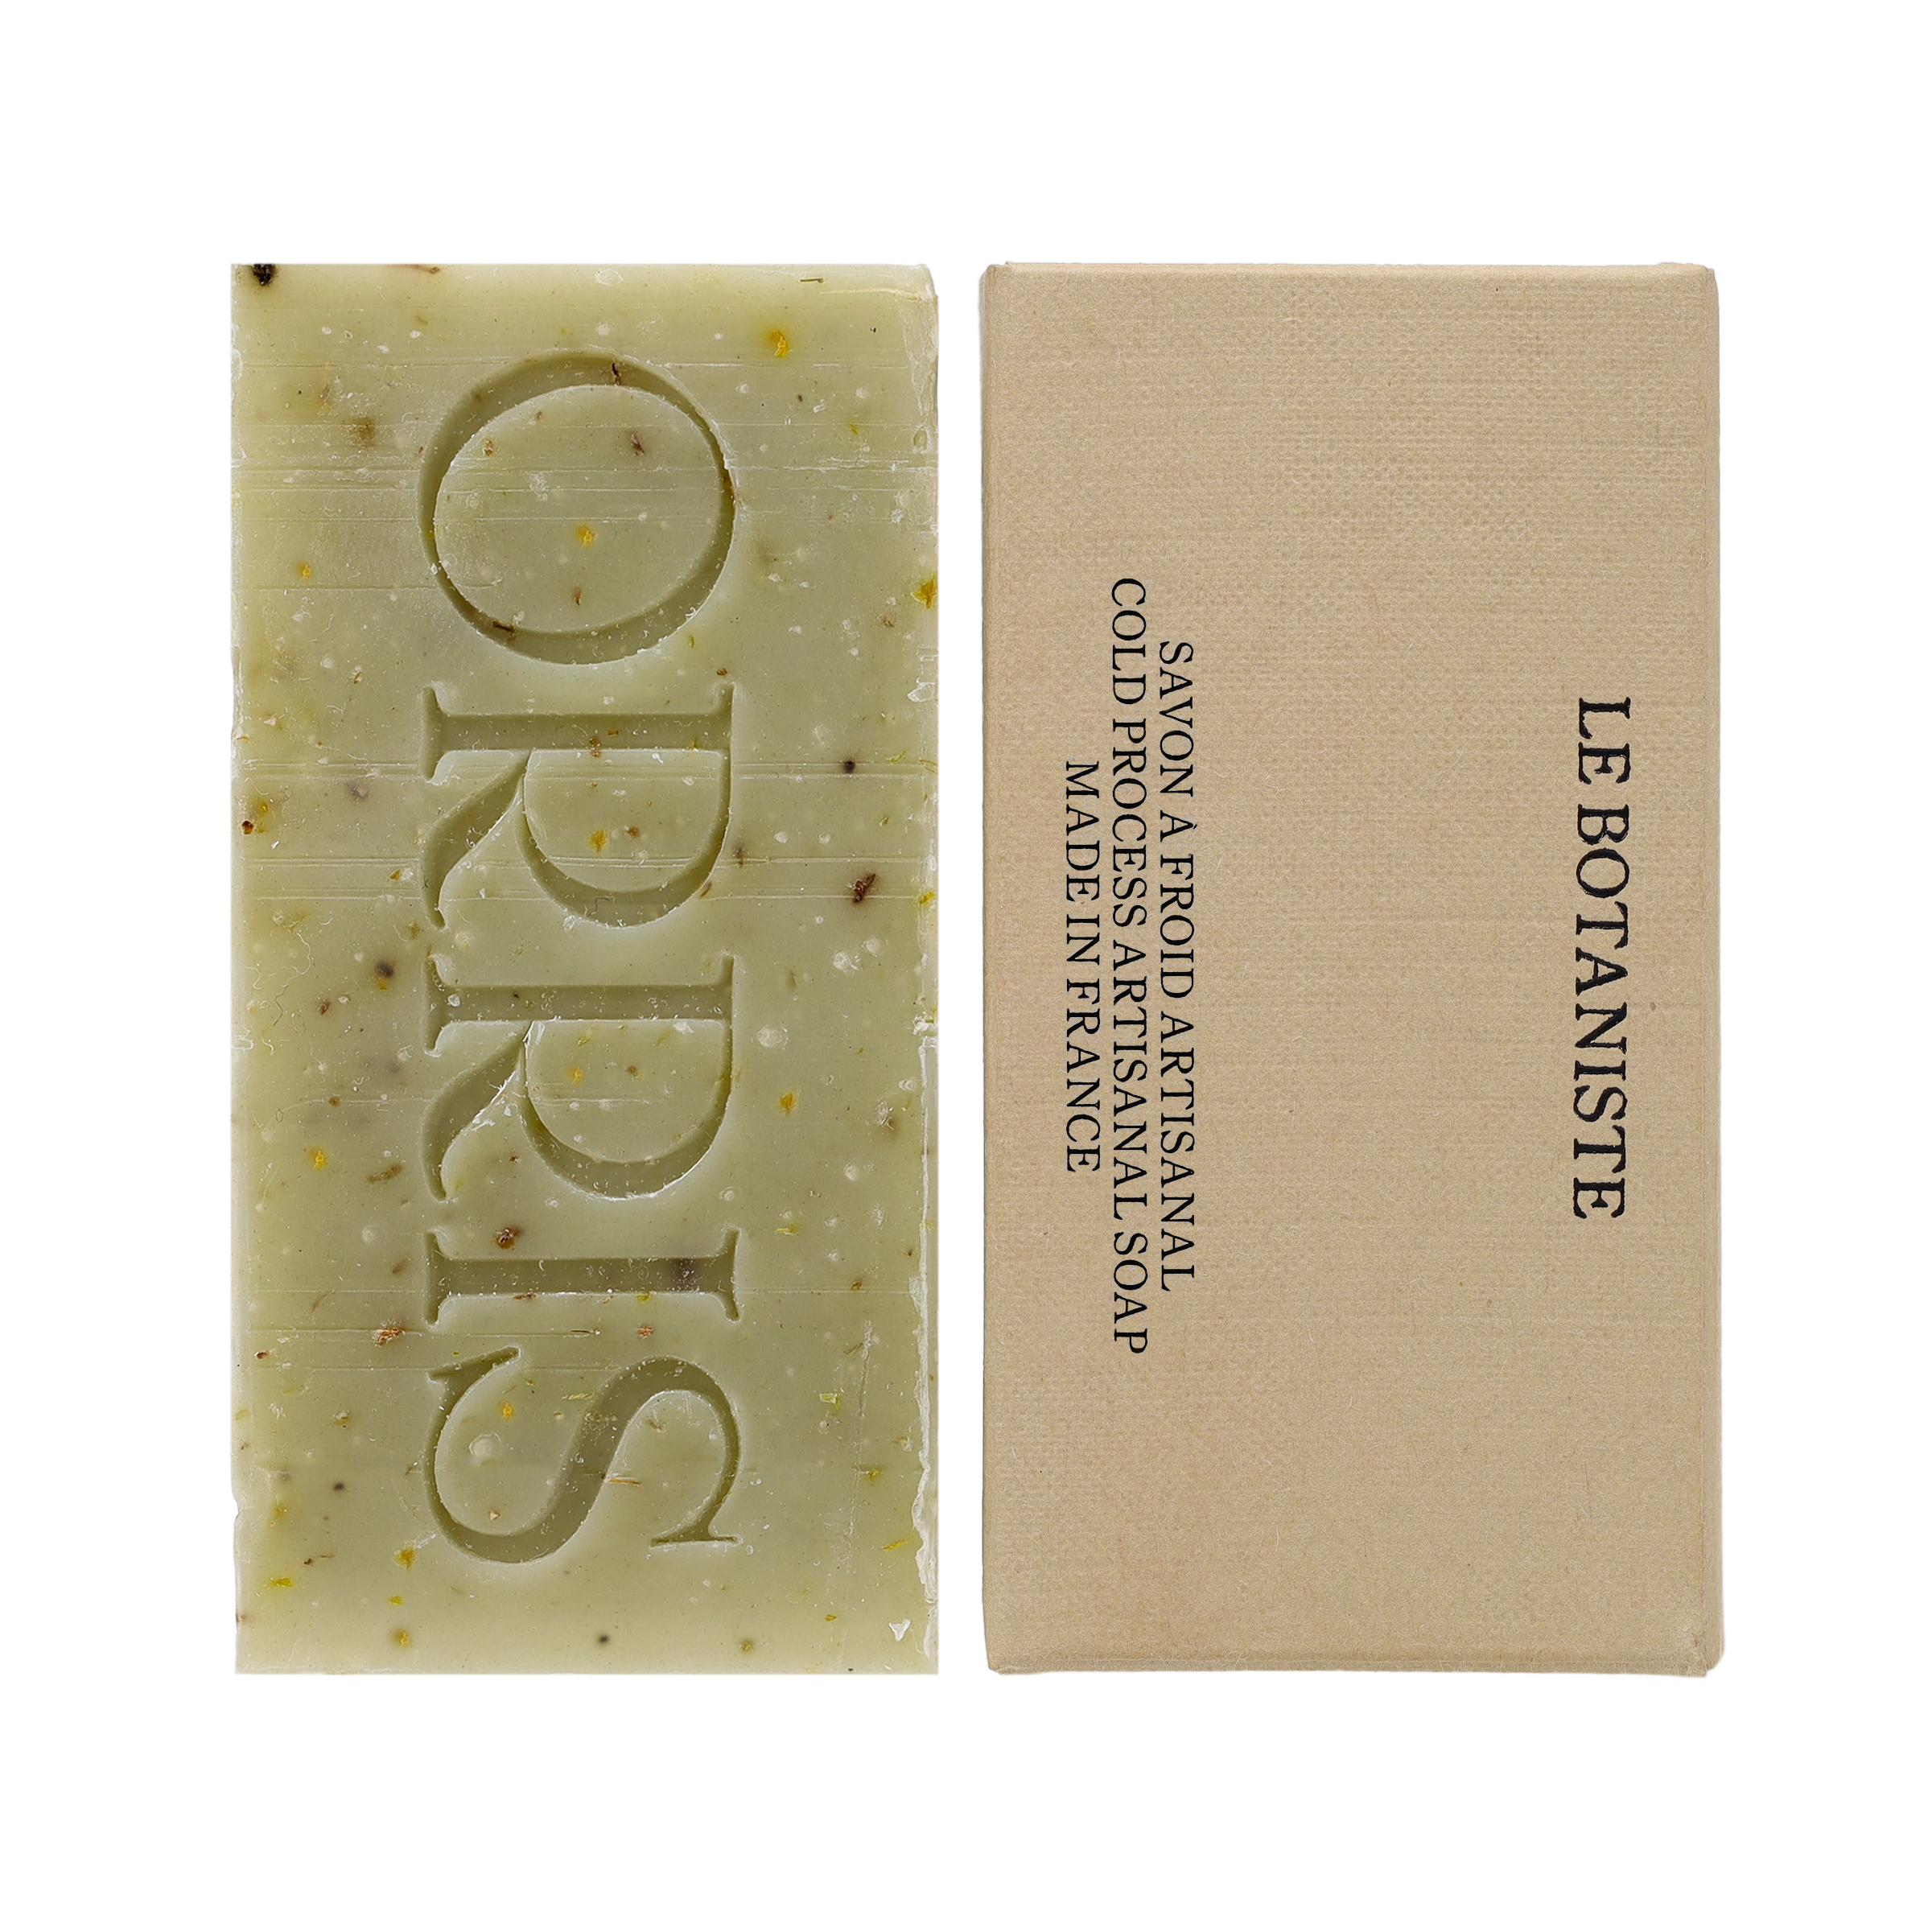 
  
  ORRIS Le Botaniste Botanical Face + Body Cleansing Bar- LORDE beauty and cosmetics
  
